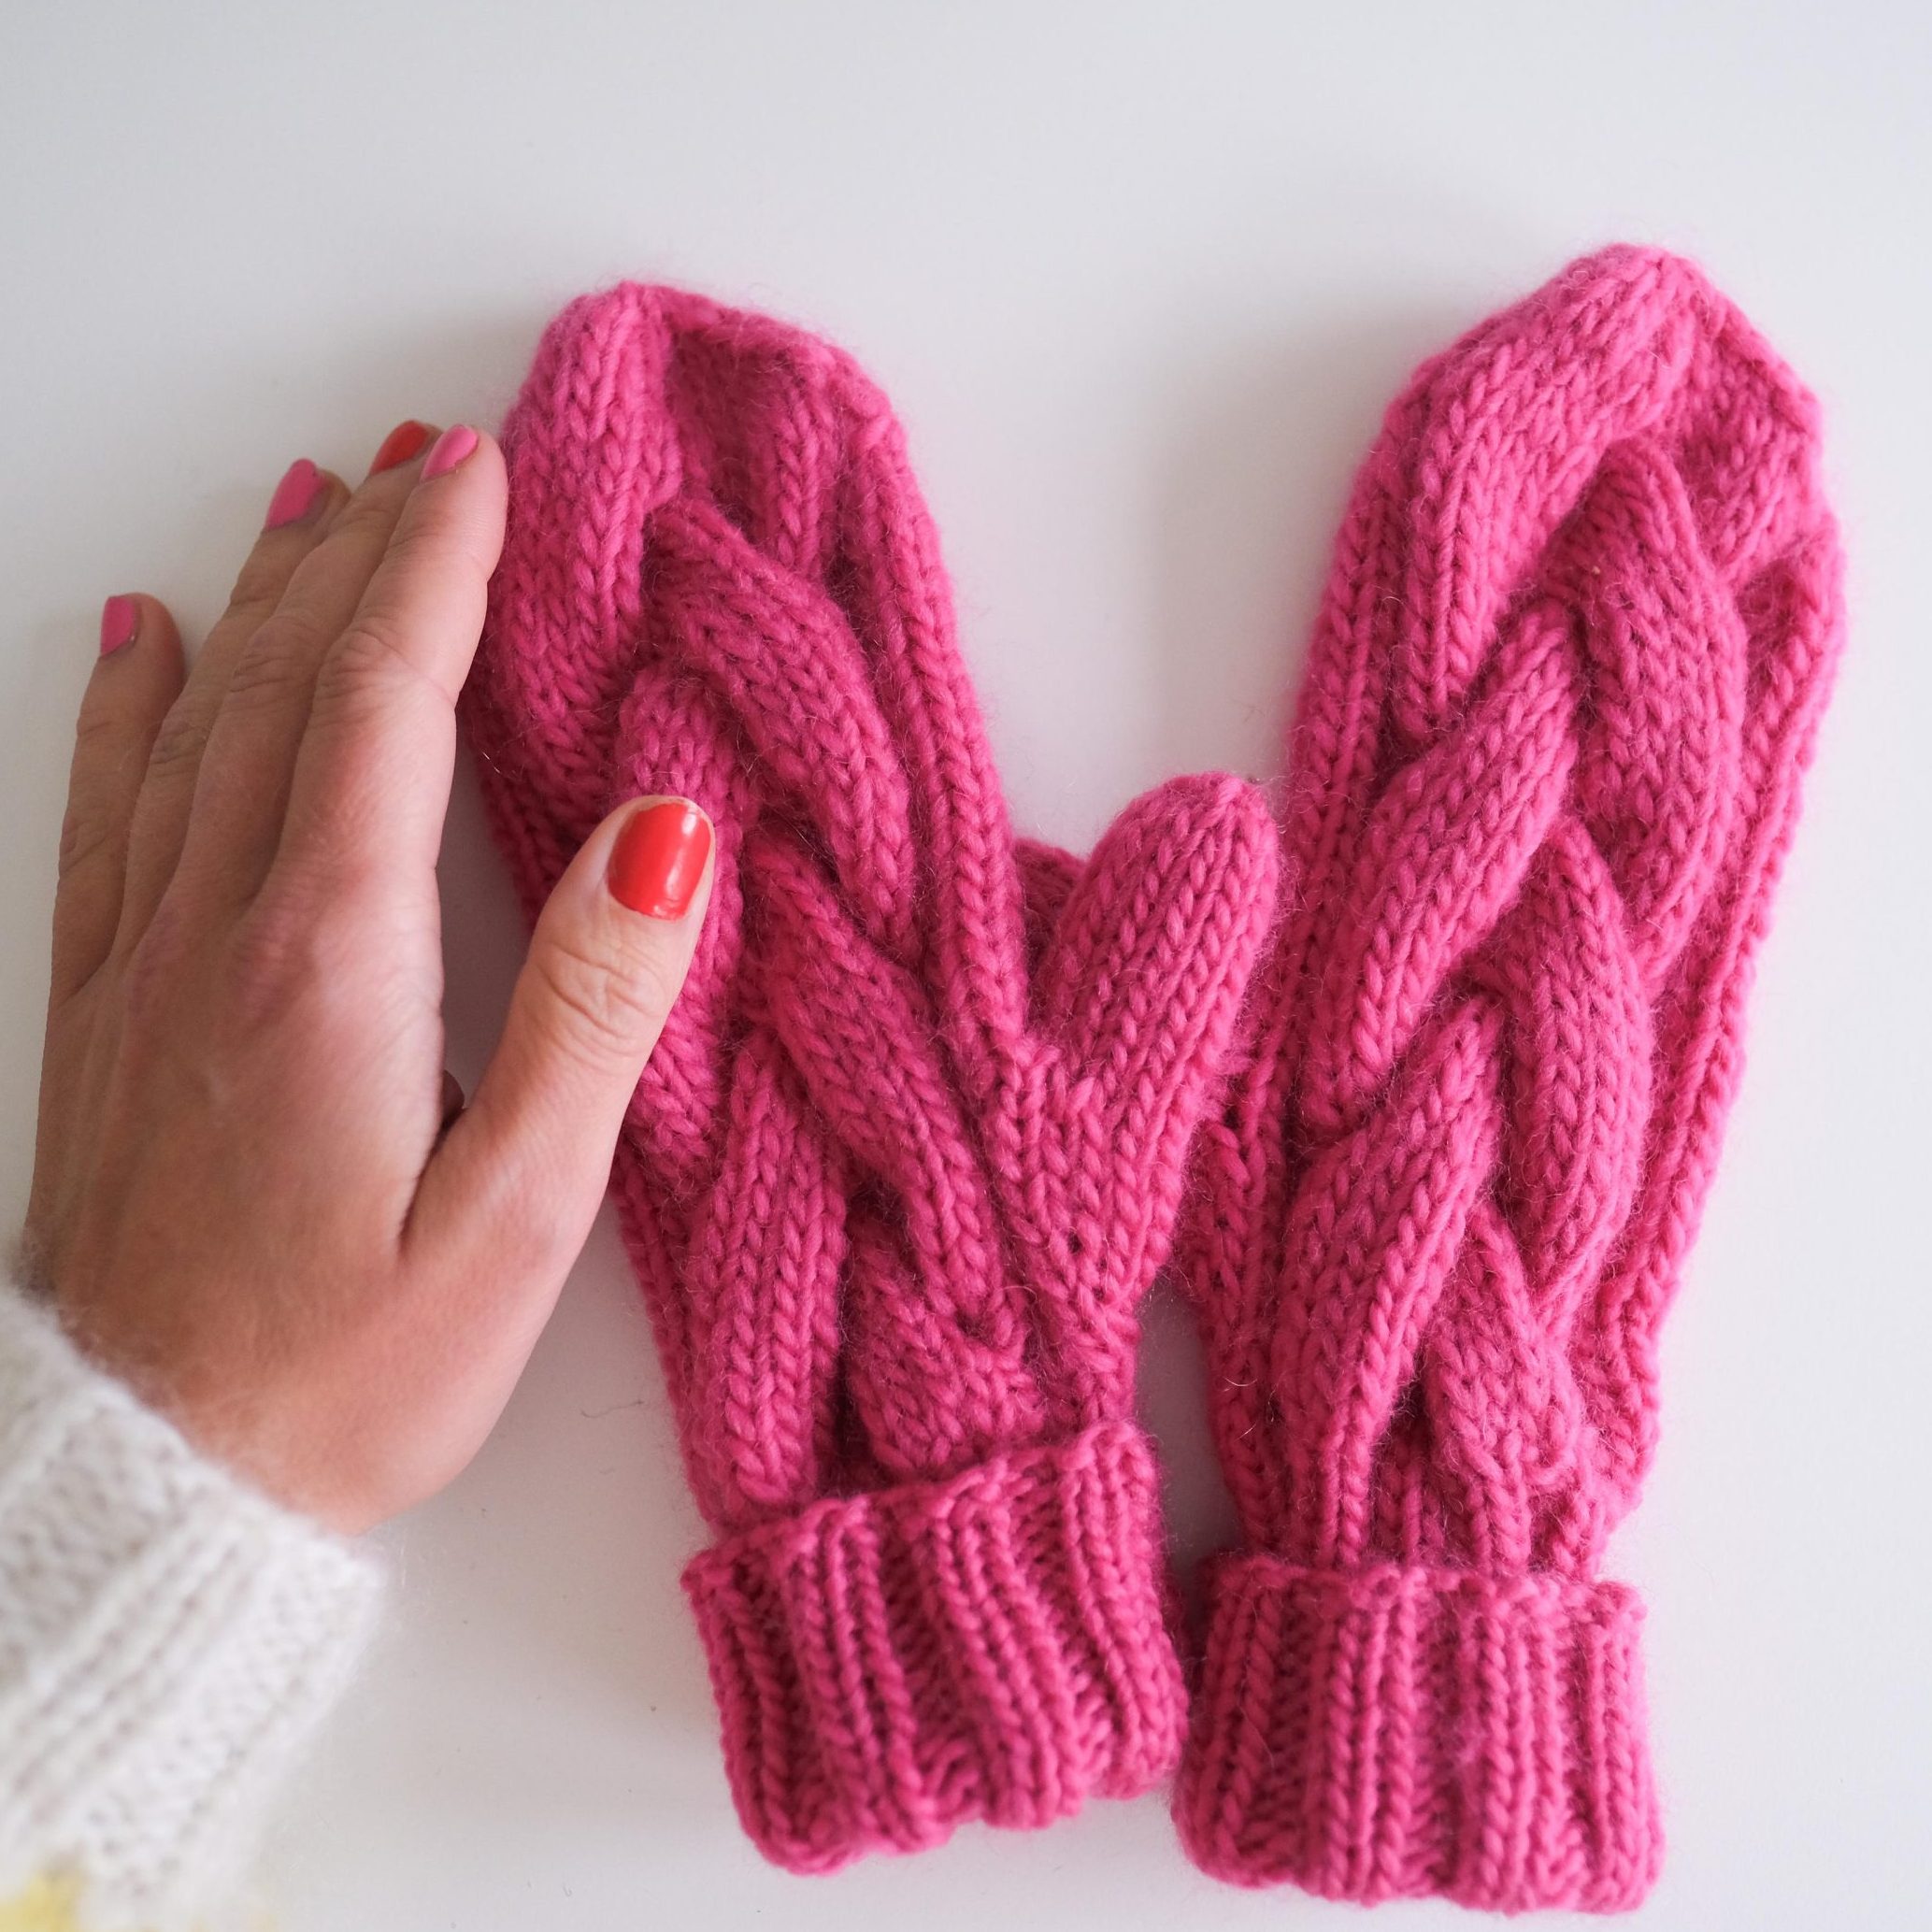  - Alba mittens | Cable knit mittens | Knitting kit - by HipKnitShop - 14/09/2022